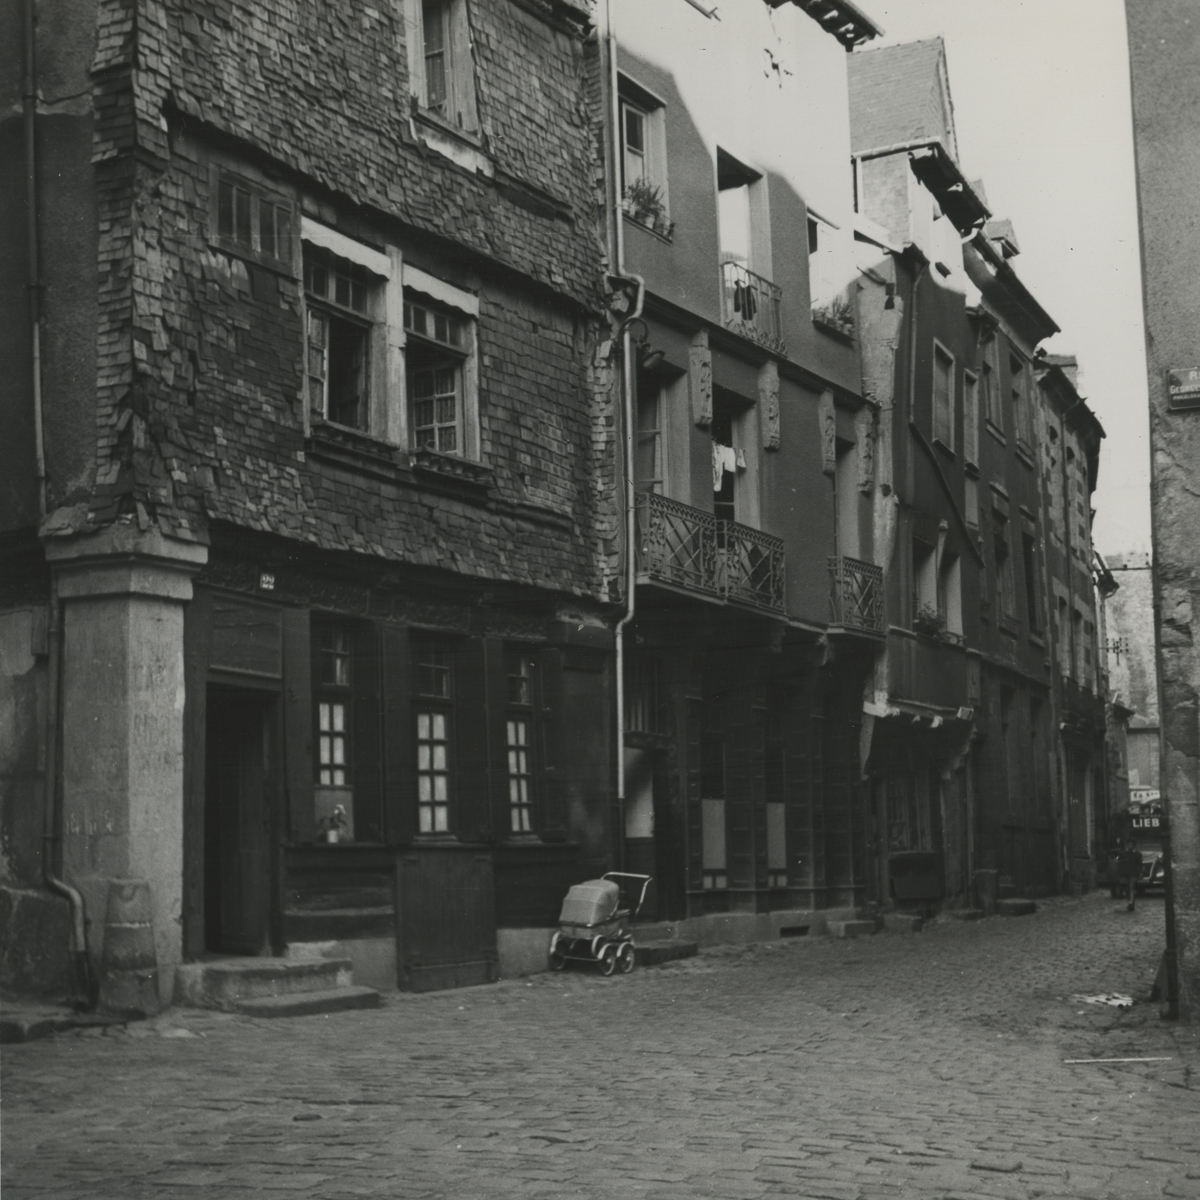 black and white photo of houses facing a narrow street, there is a baby carriage outside one of the houses